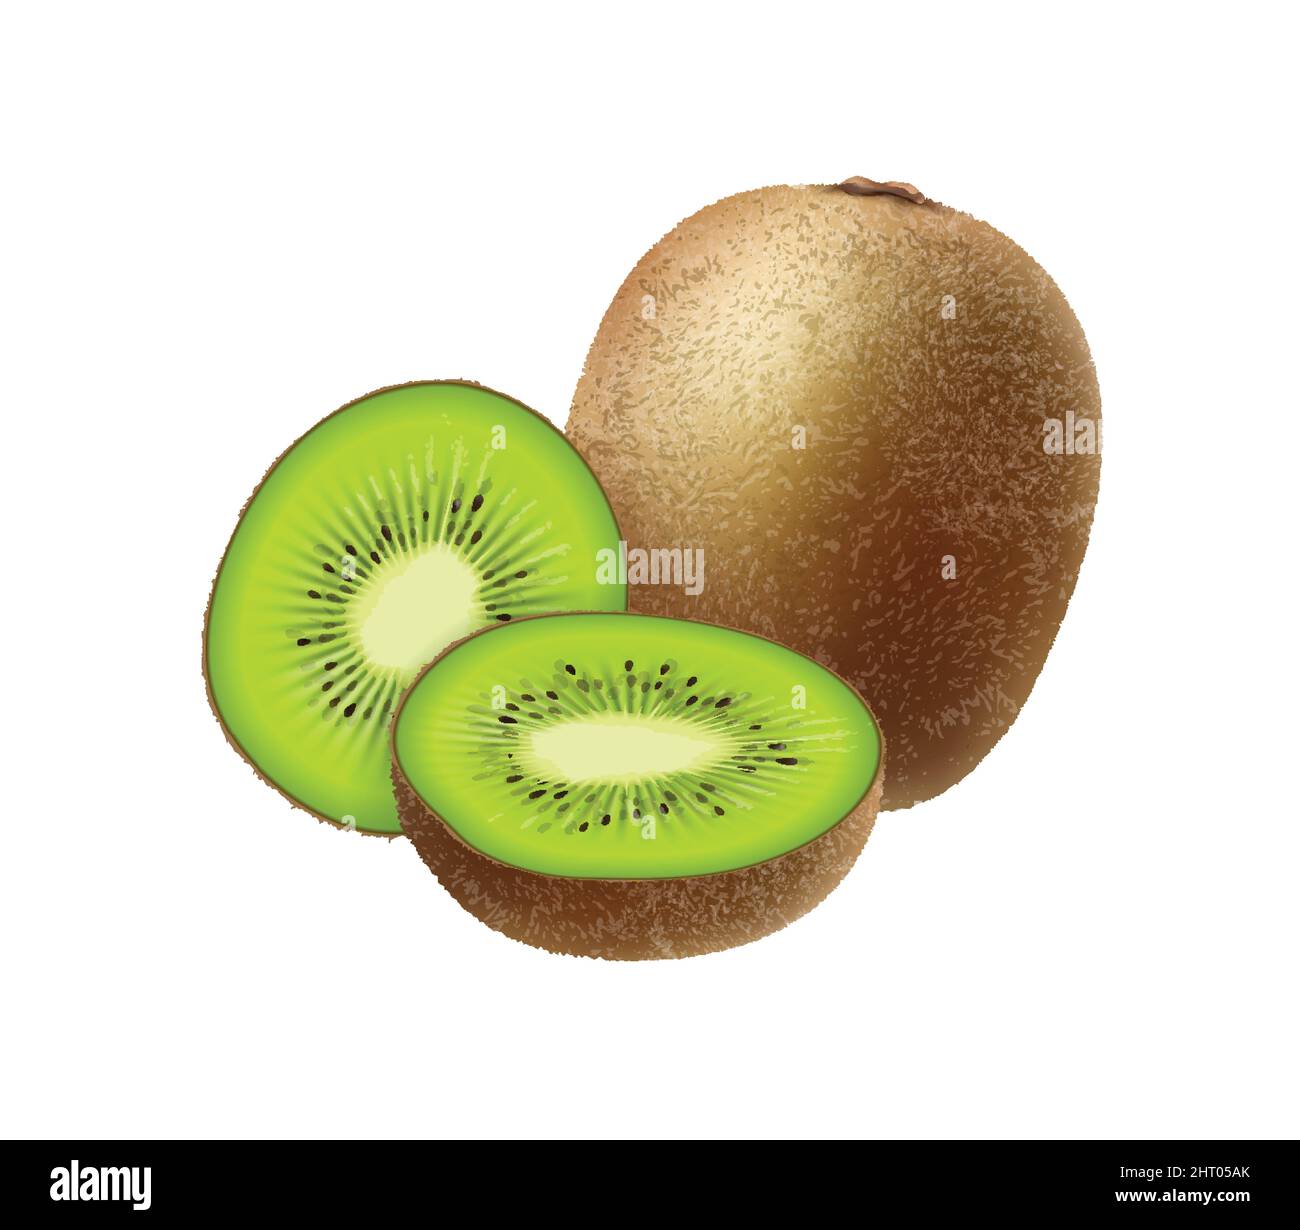 Realistic fruits composition with images of whole and sliced kiwi fruit on blank background vector illustration Stock Vector